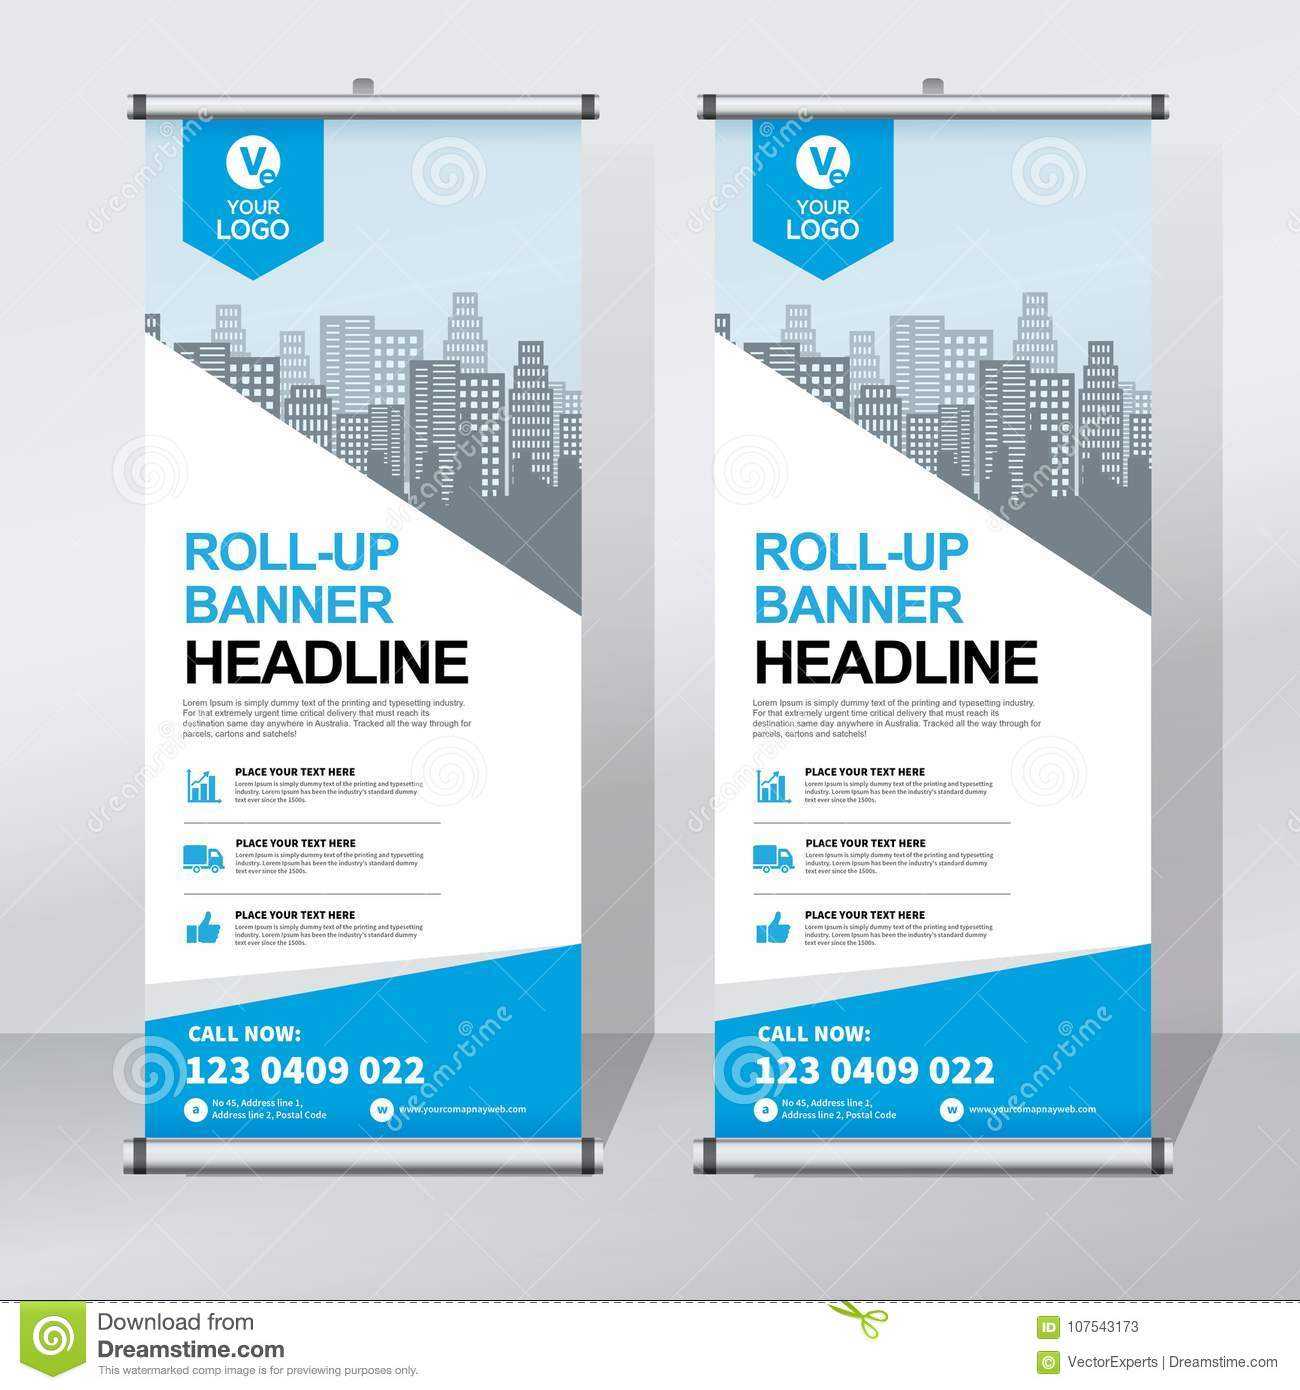 Retractable Banner Design Templates – Yeppe For Retractable Banner Design Templates